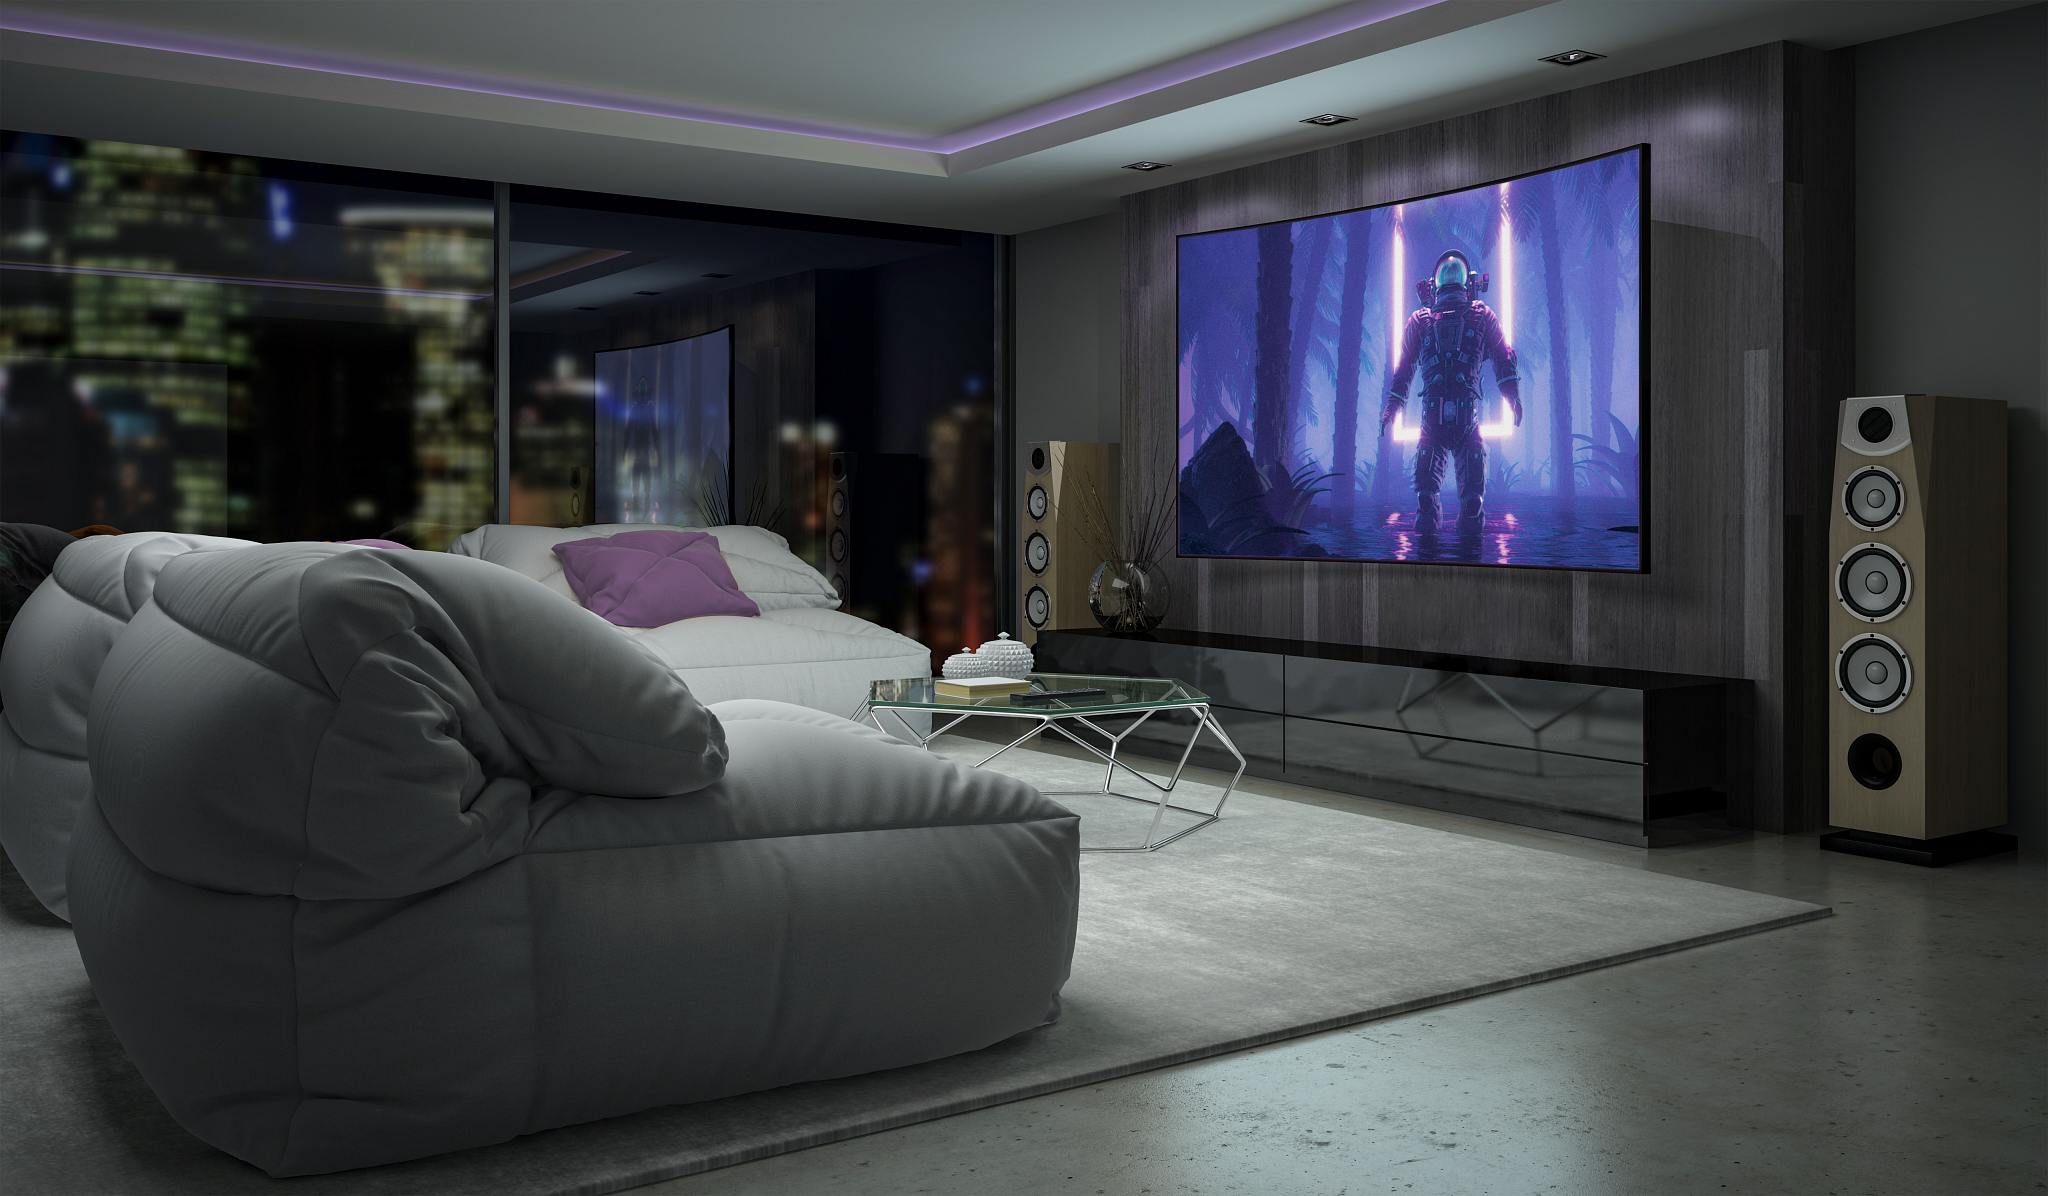 THE HOME THEATER EXPERIENCE – IT’S ALL ABOUT CONTROL